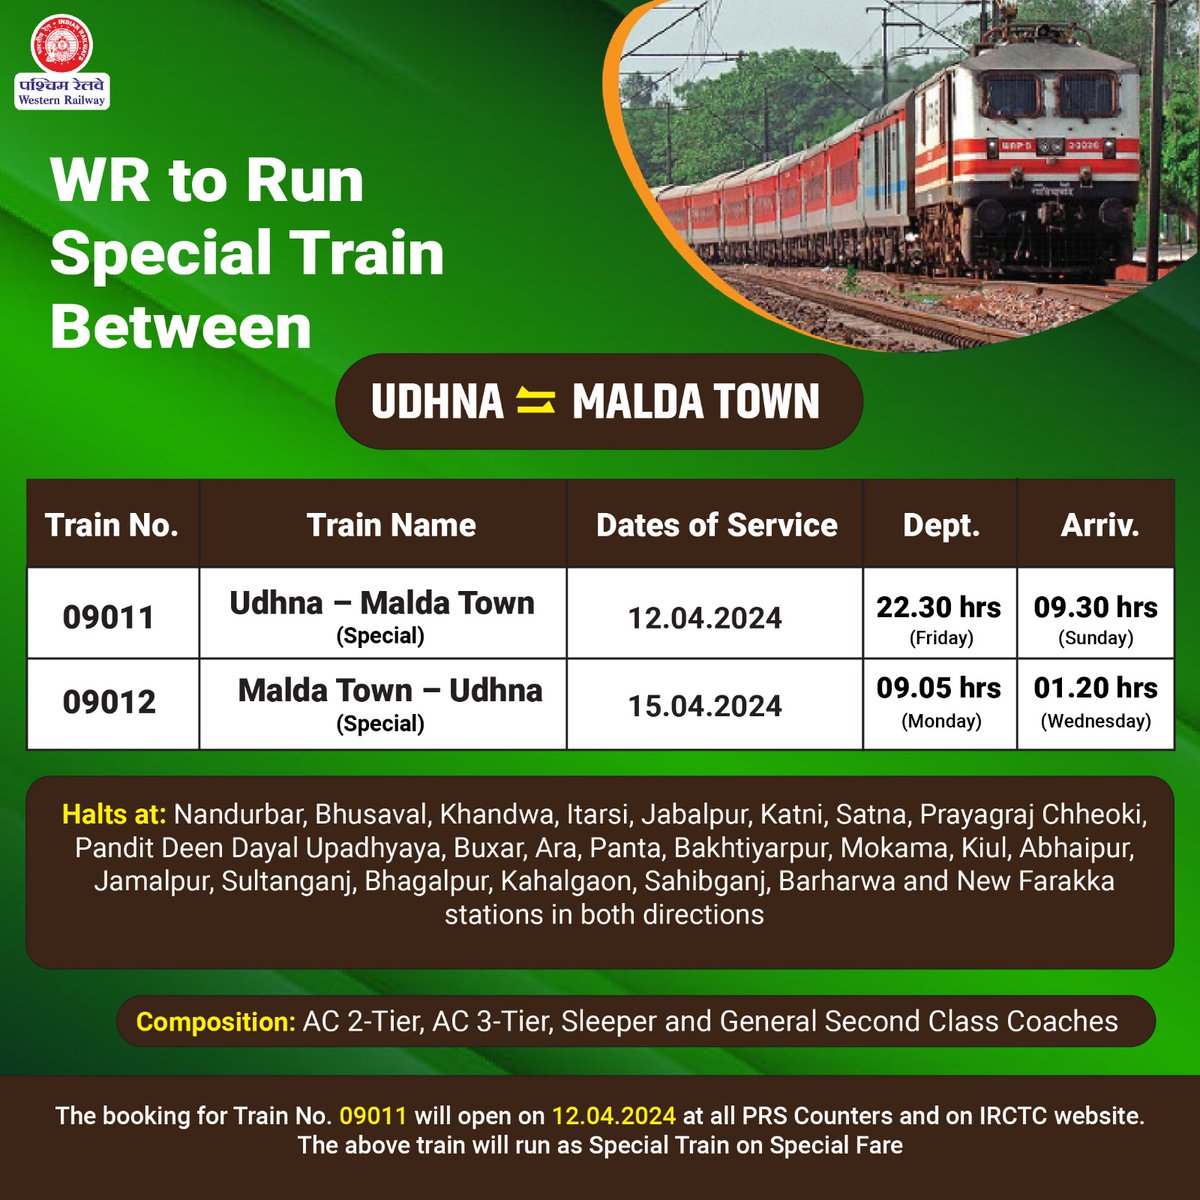 For the convenience of passengers and to meet the travel demand, WR has decided to run a Special Train between Udhna and Malda Town. The booking for train no. 09011 will open on 12 April 2024, Friday at PRS counters and IRCTC website. #WRUpdates